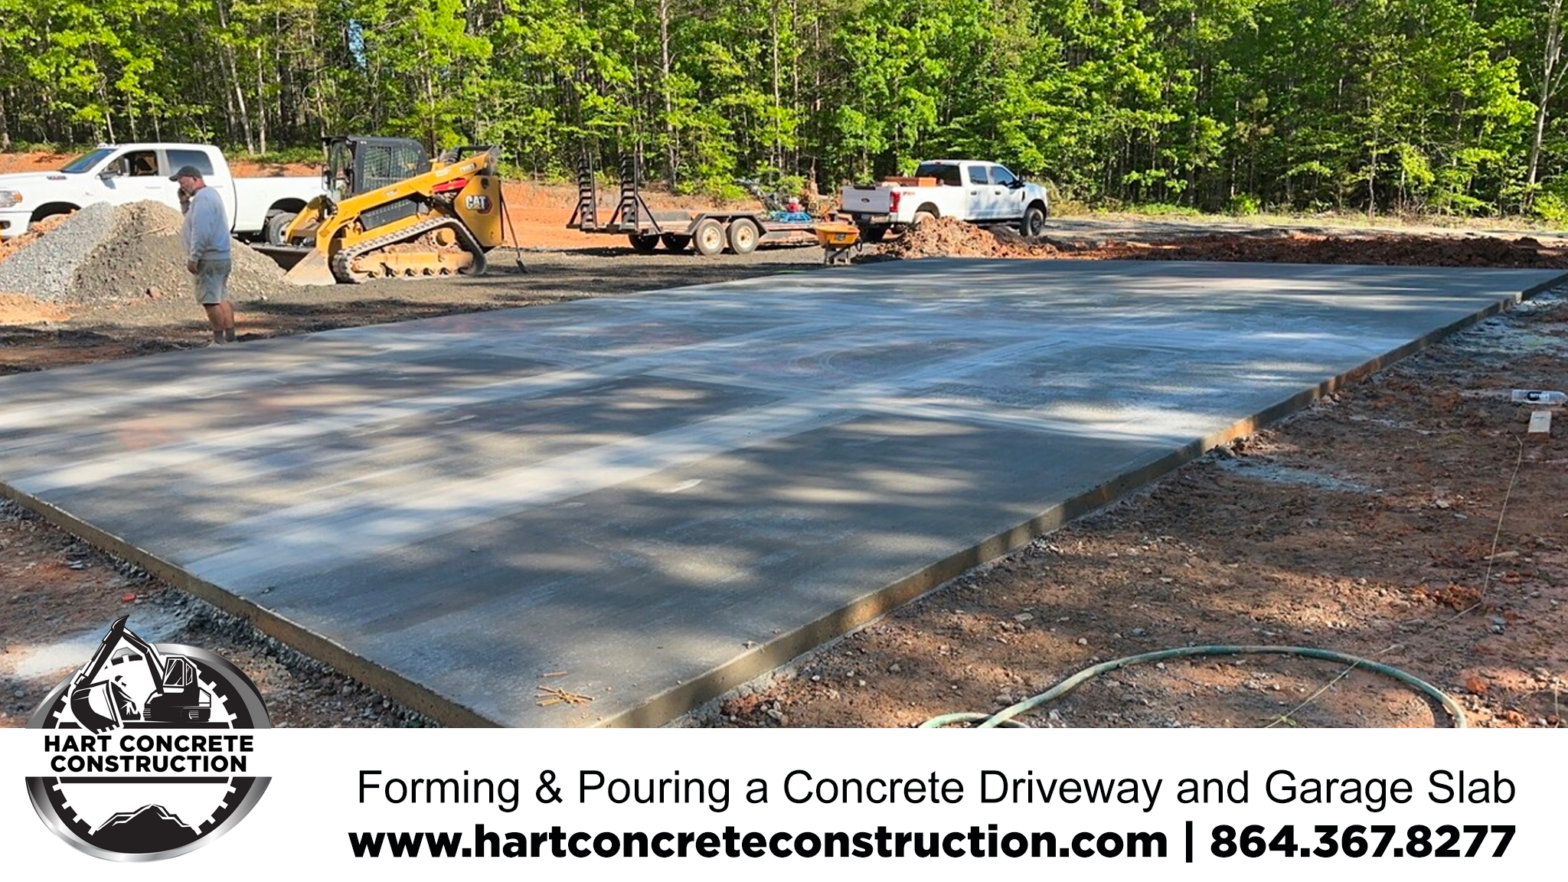 Forming & Pouring a Concrete Driveway and Garage Slab